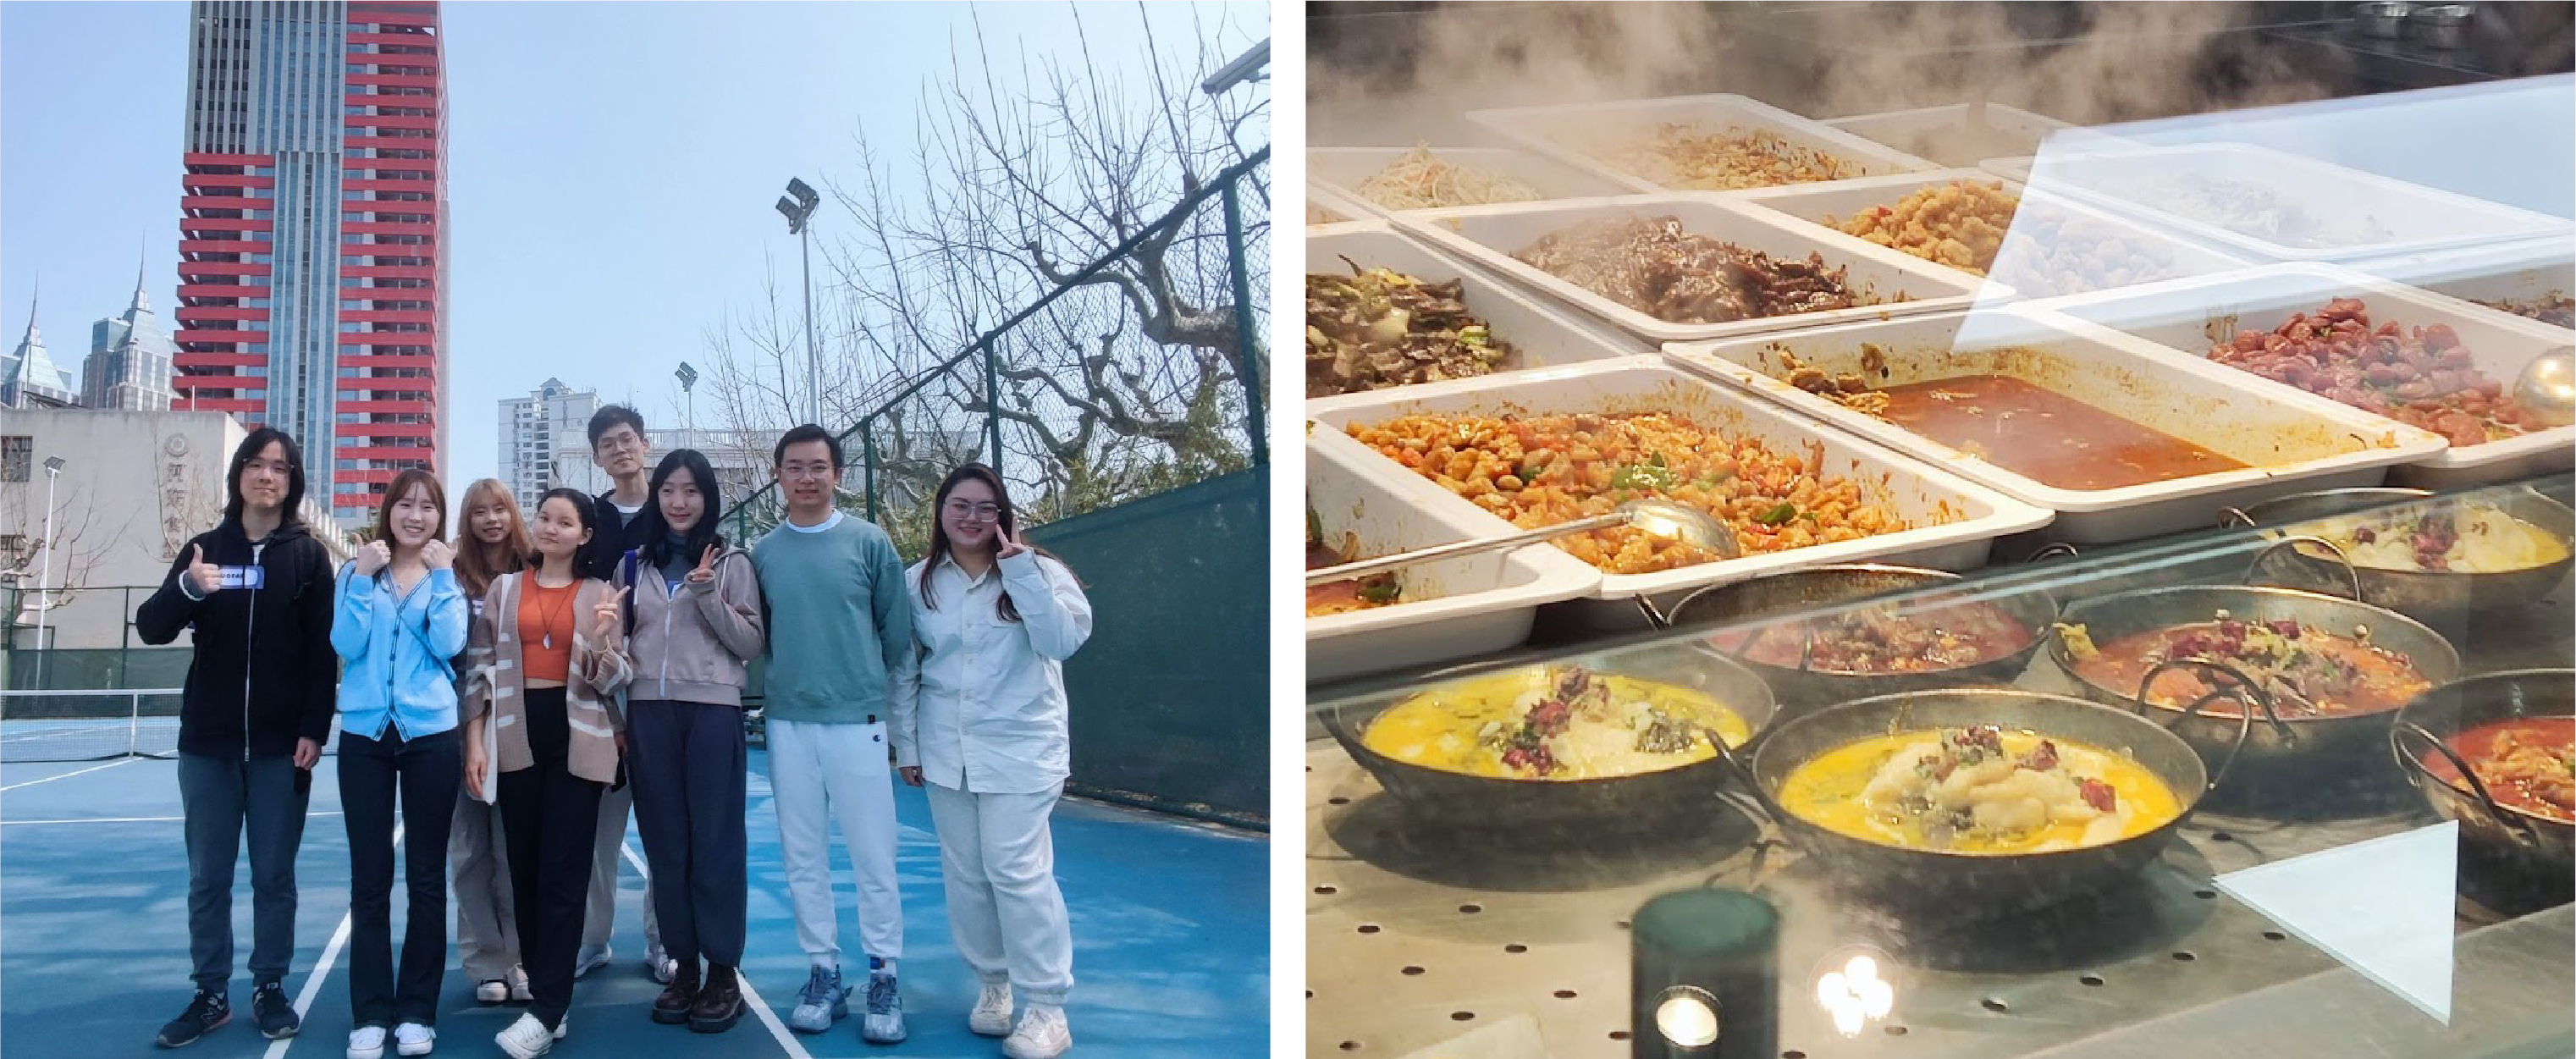 First photo: students on the tennis court. Second photo: close up of ECNU cafeteria food